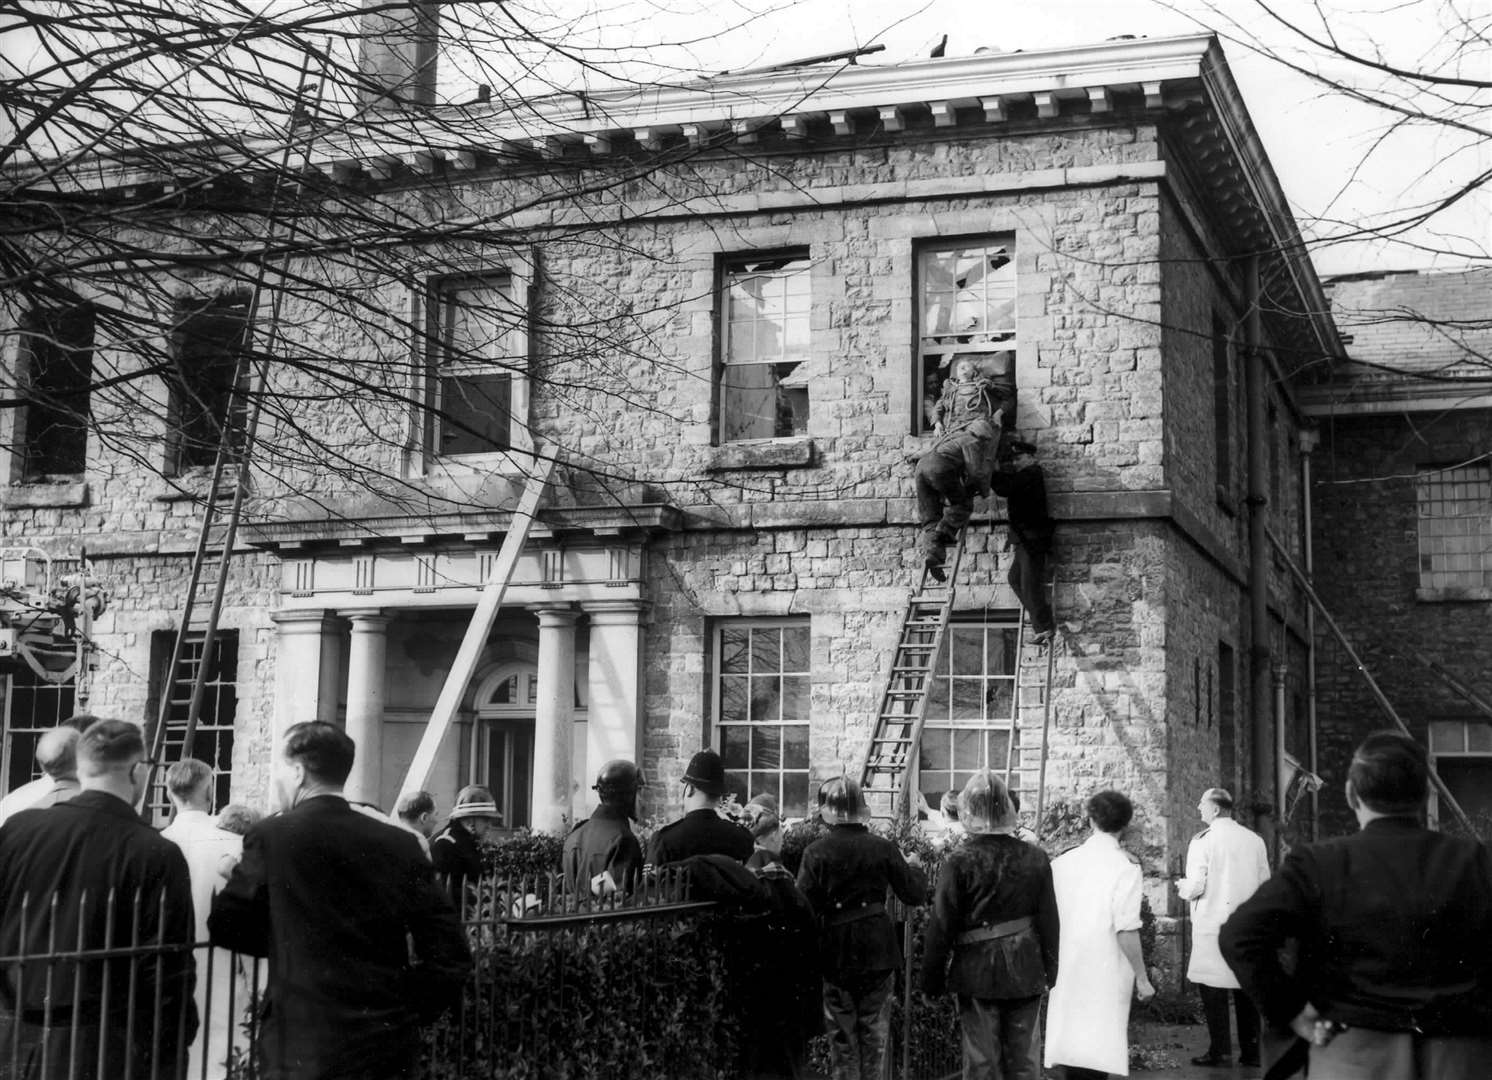 Rescue operation during a fire at Oakwood Hospital in 1957, where seven people were killed when a tower collapsed